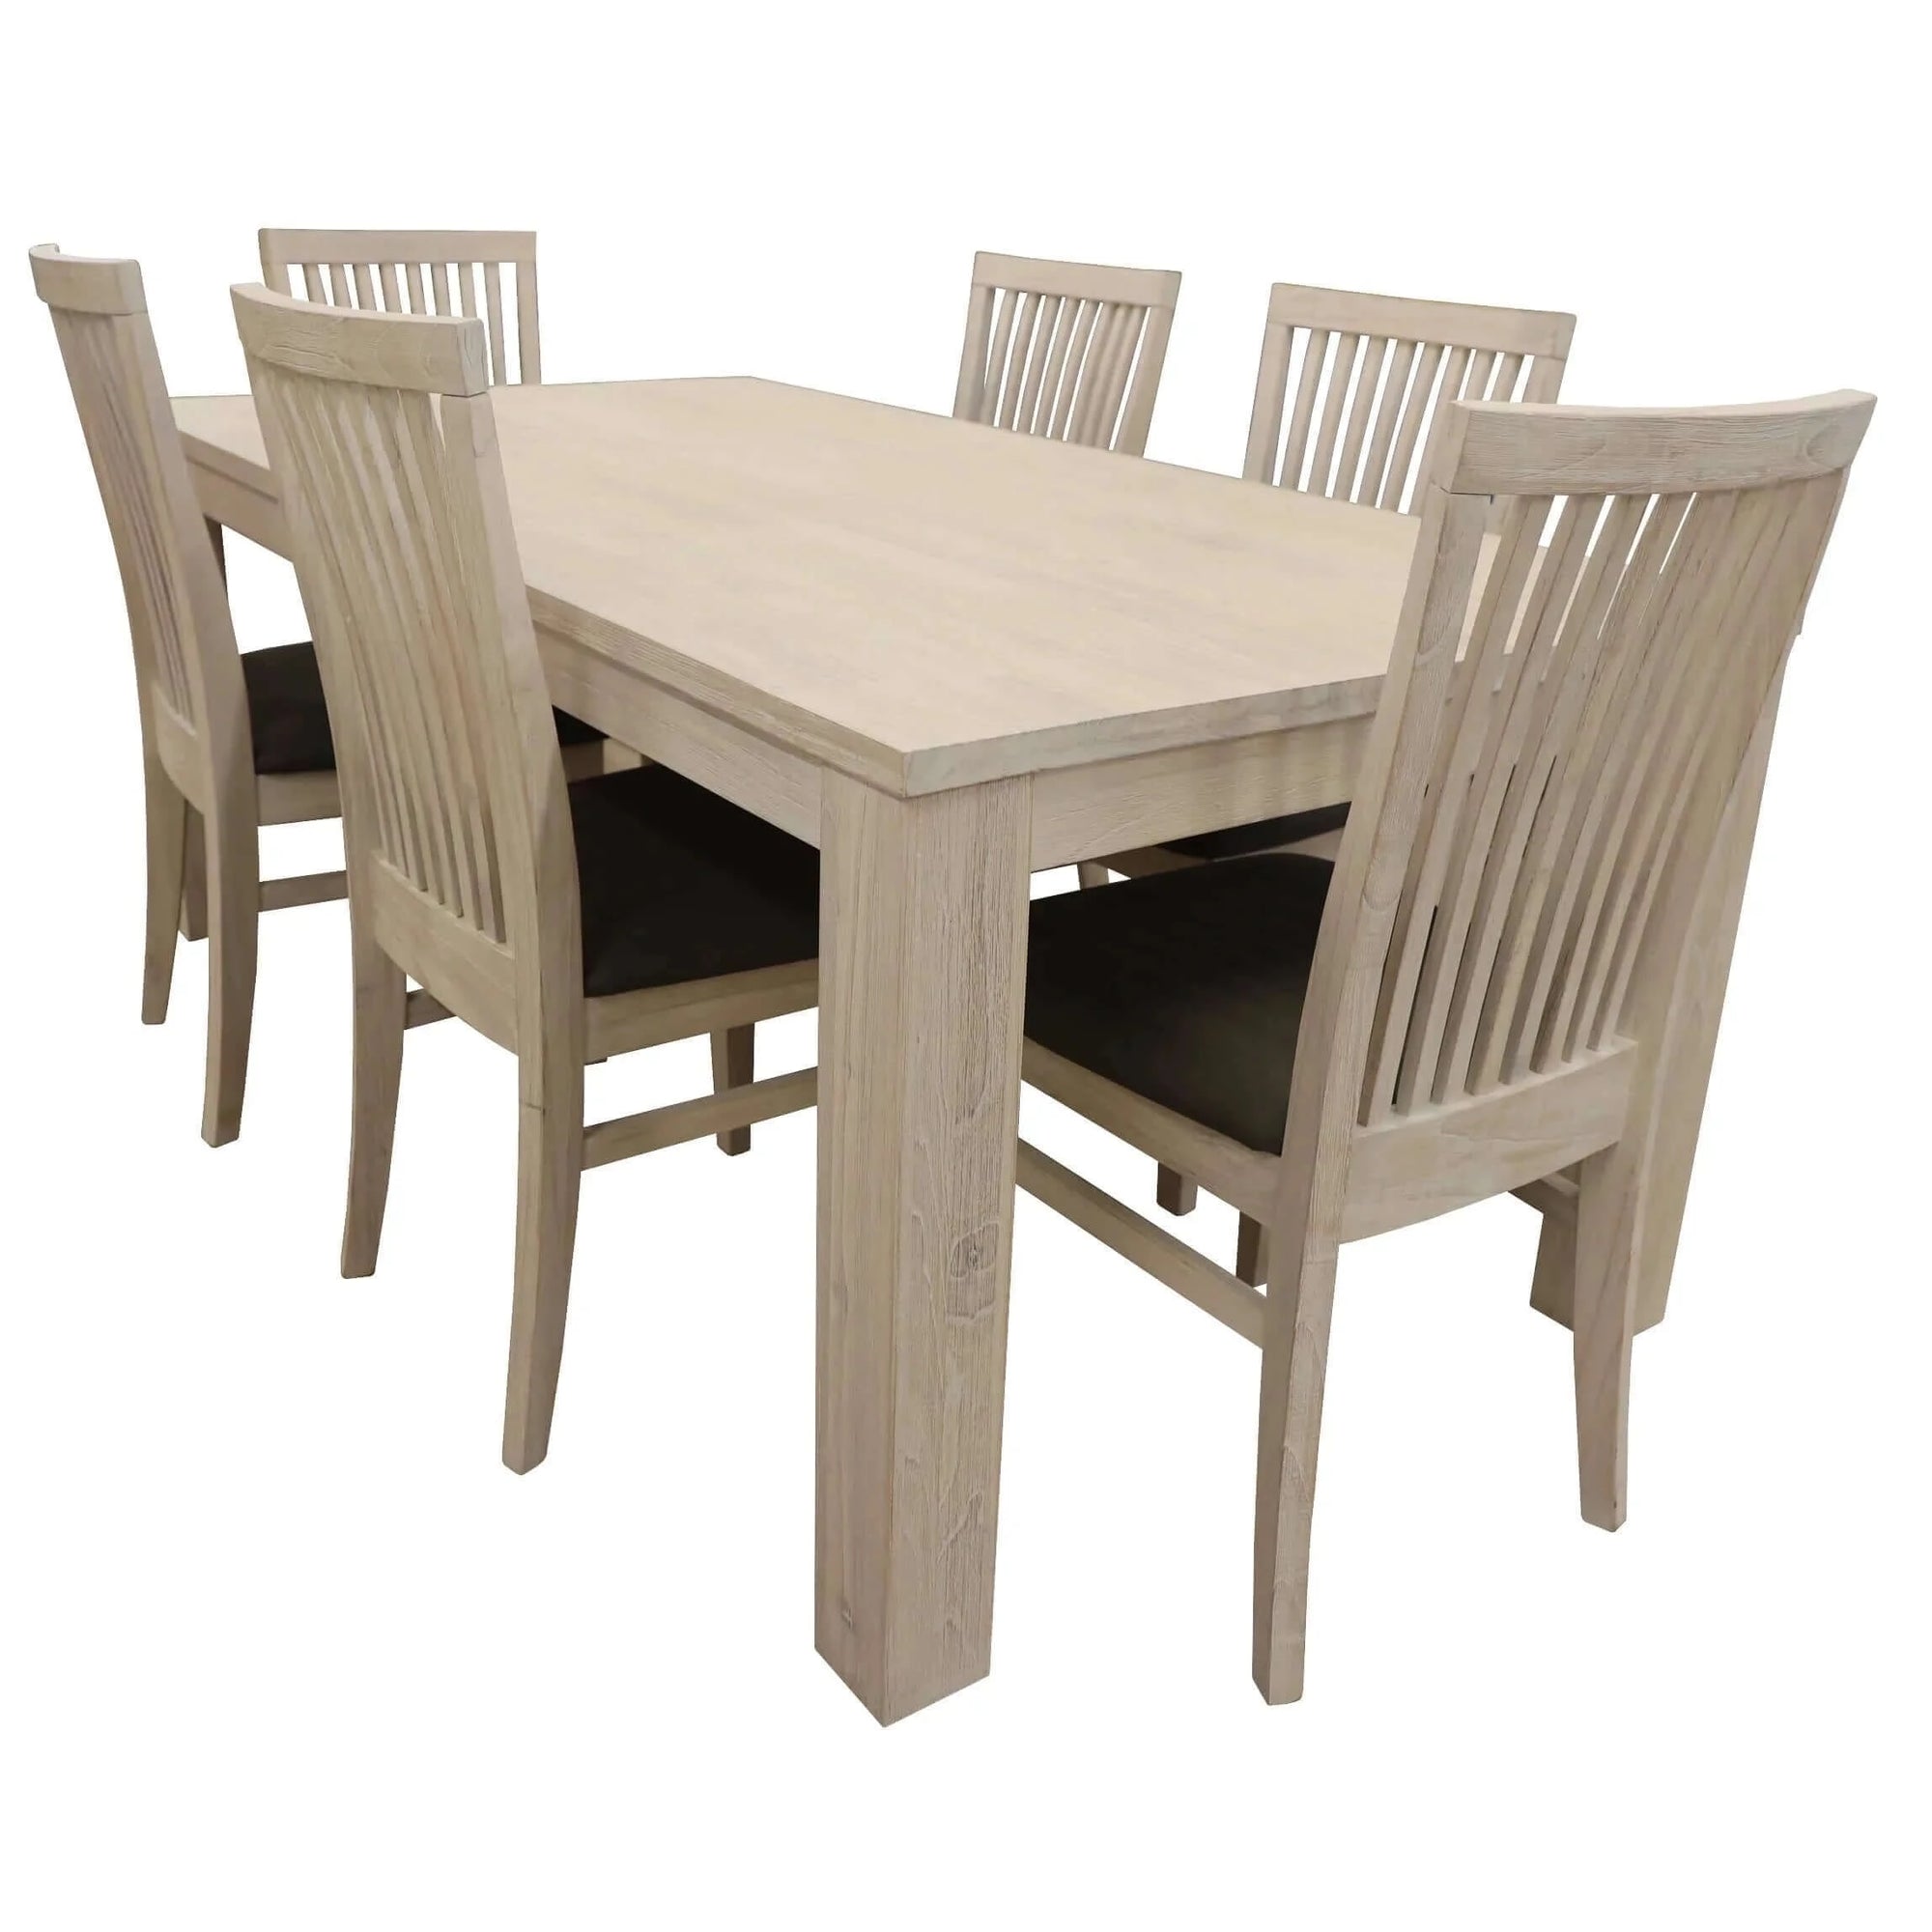 Buy foxglove 7pc dining set 190cm table 6 pu seat chair solid mt ash wood - white - upinteriors-Upinteriors